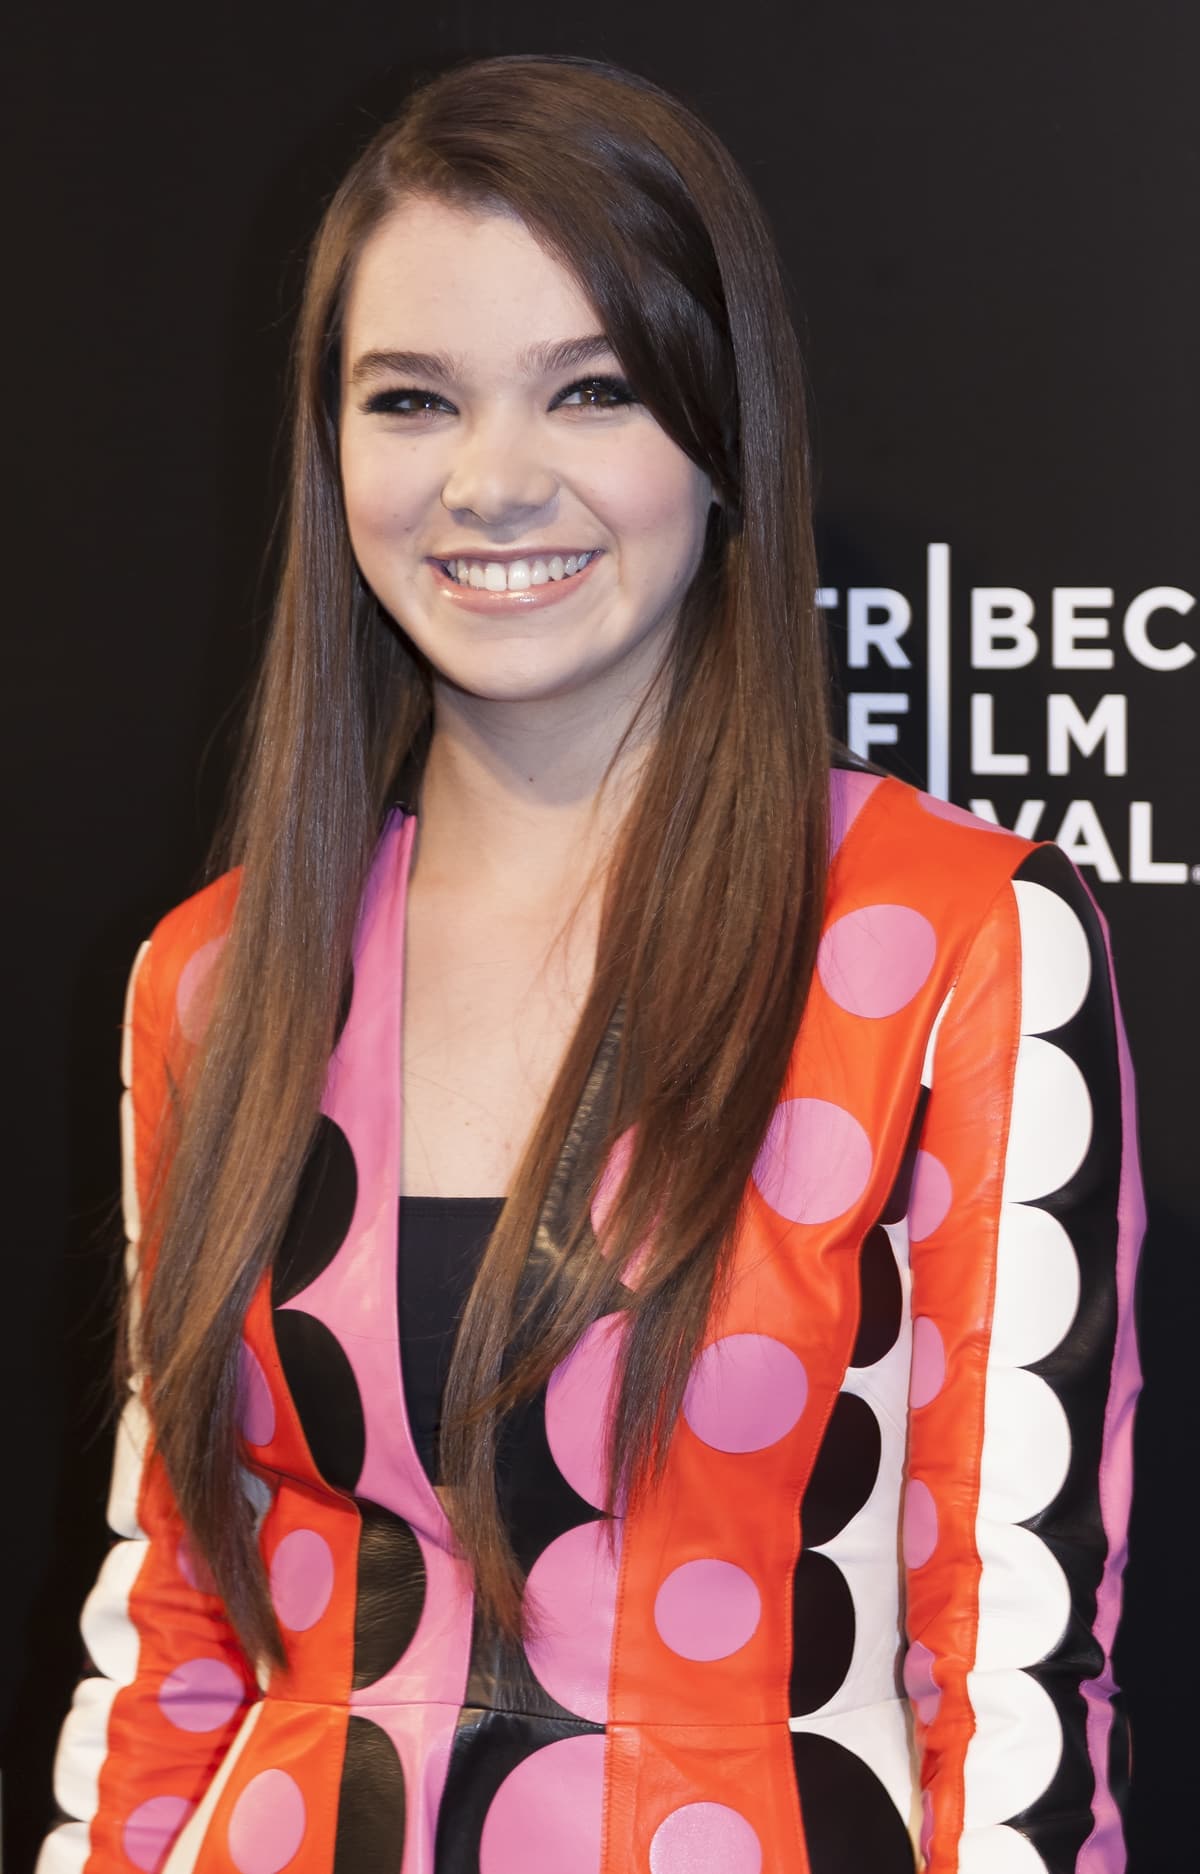 Hailee Steinfeld wears a leather patchwork dress from the Valentino Fall 2014 collection at the premiere of "Begin Again," during the 2014 Tribeca Film Festival